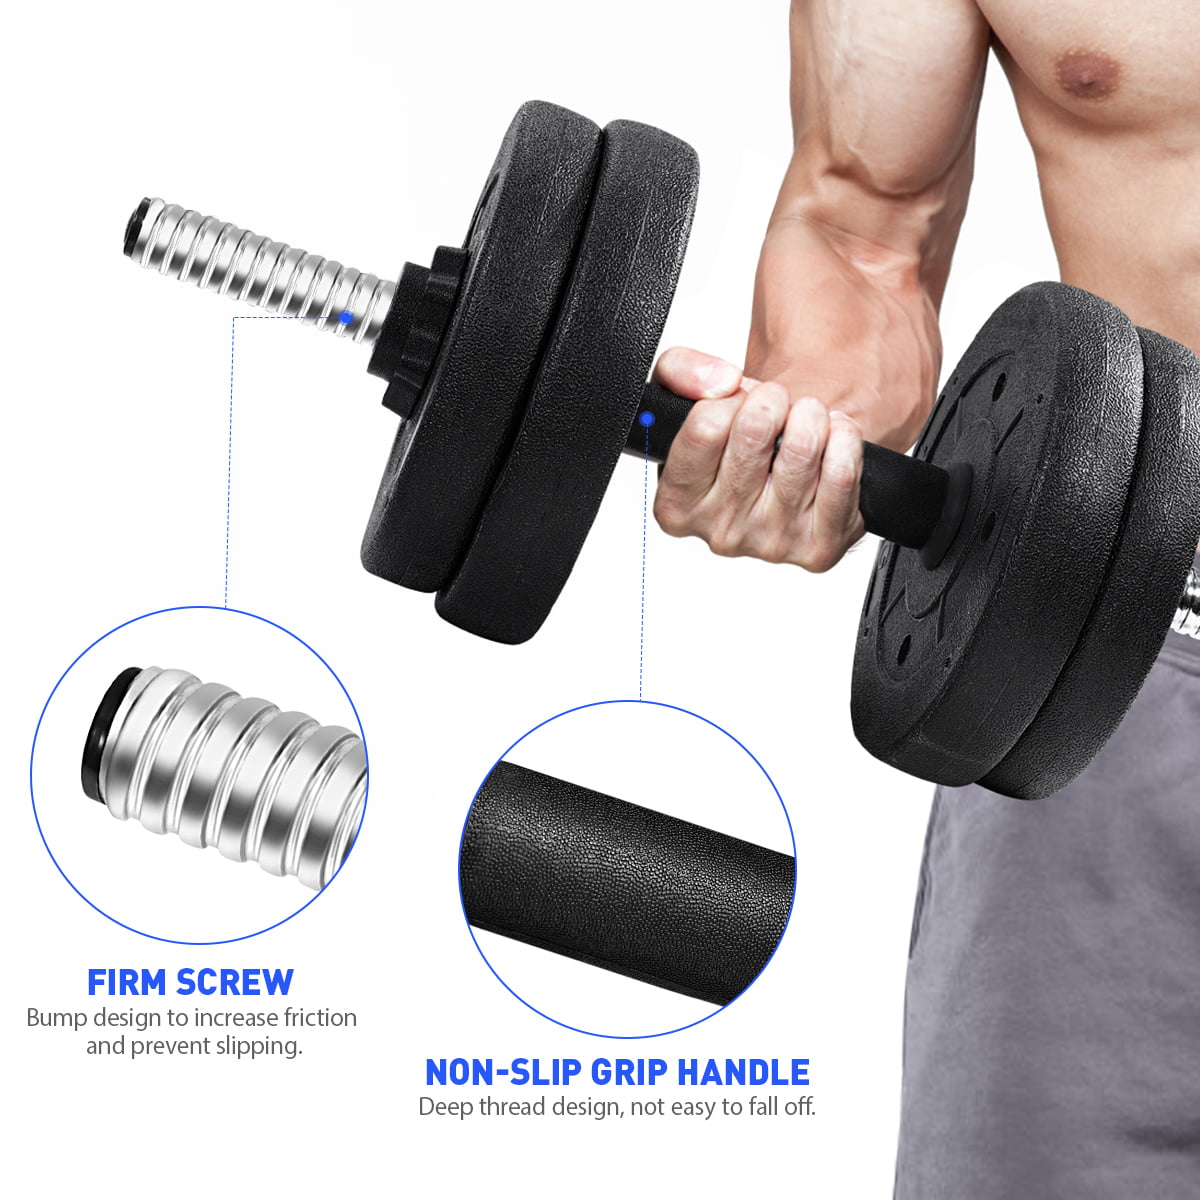 30Kg Multiware Dumbbell Set Gym Fitness Exercise Sports Home Weights Training 